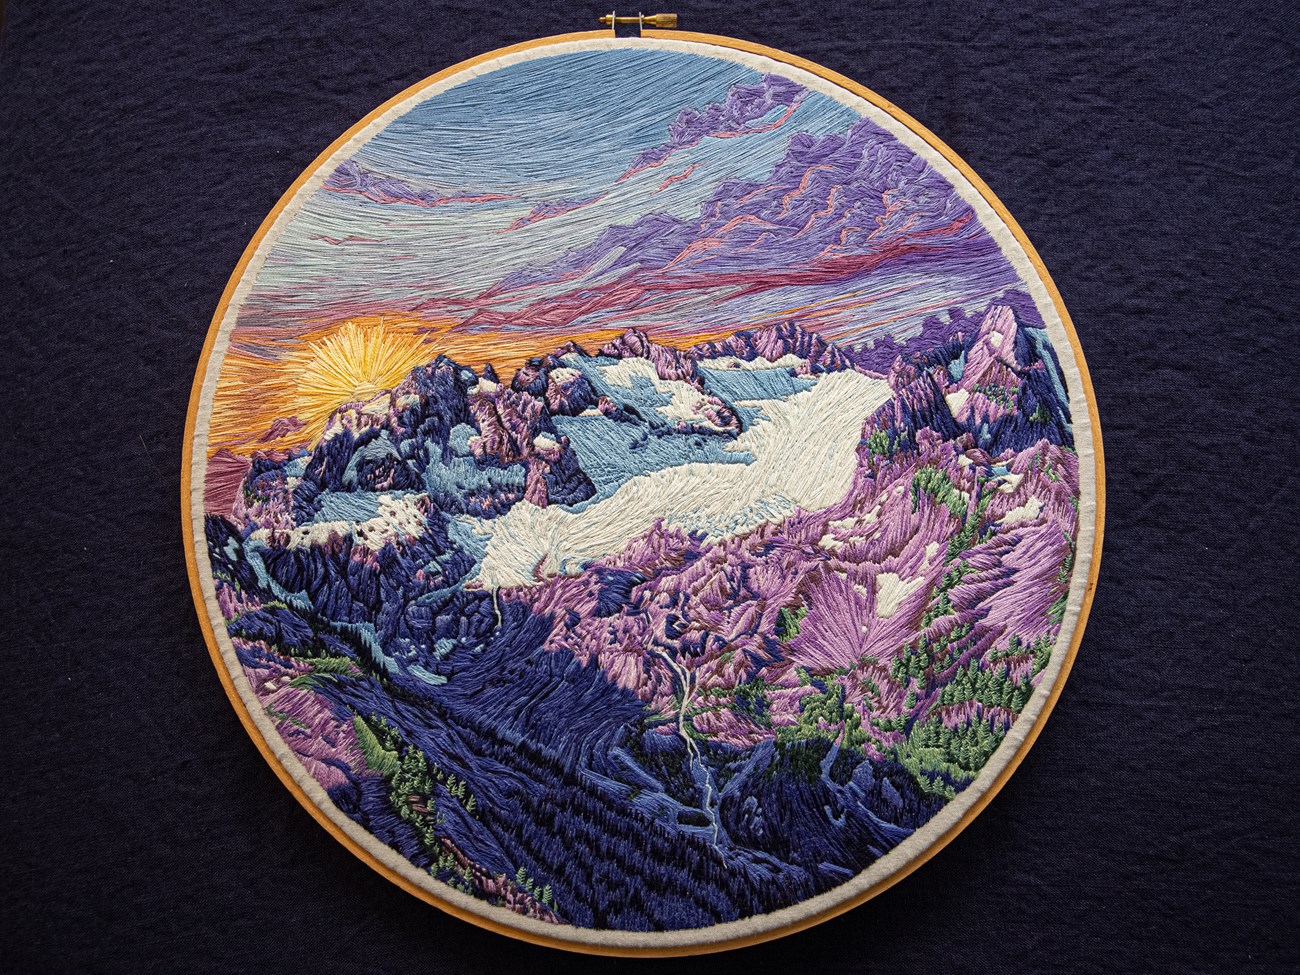 An embroidery hoop with a detailed sunset over a mountain glacier, rendered in threads of purple, white, gold, and blue.